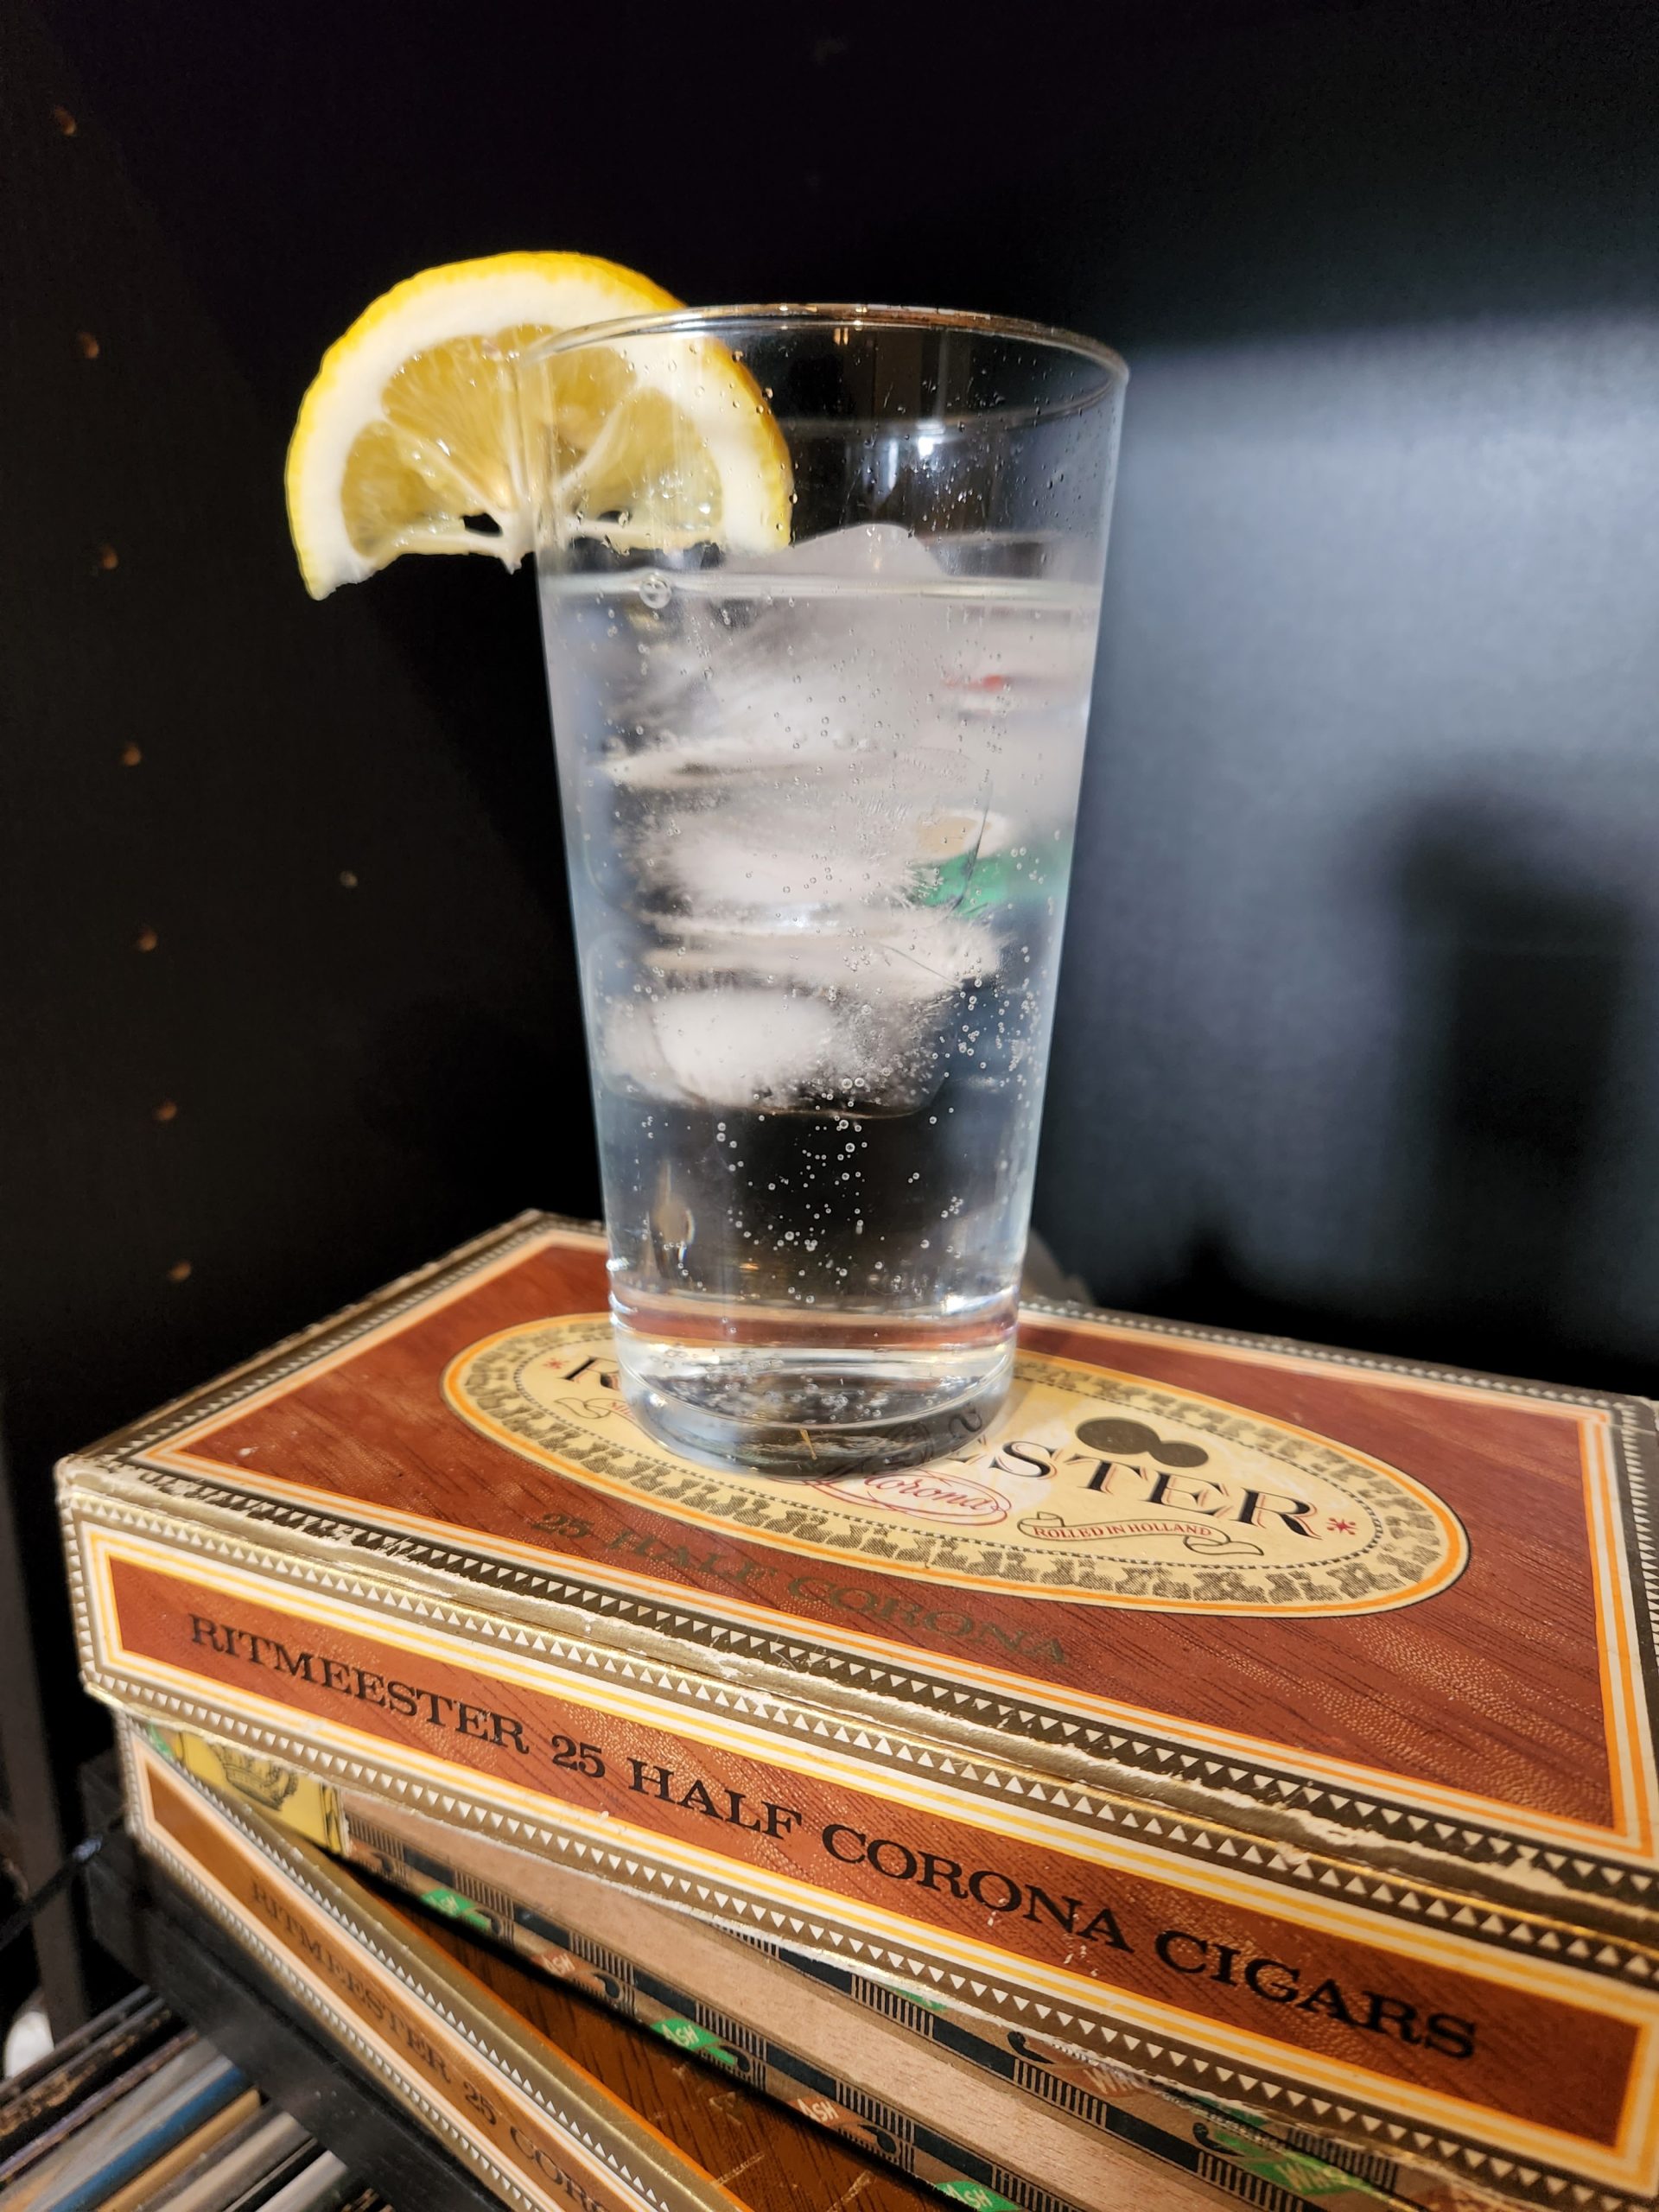 A Gin and Tonic sitting on cigar boxes.